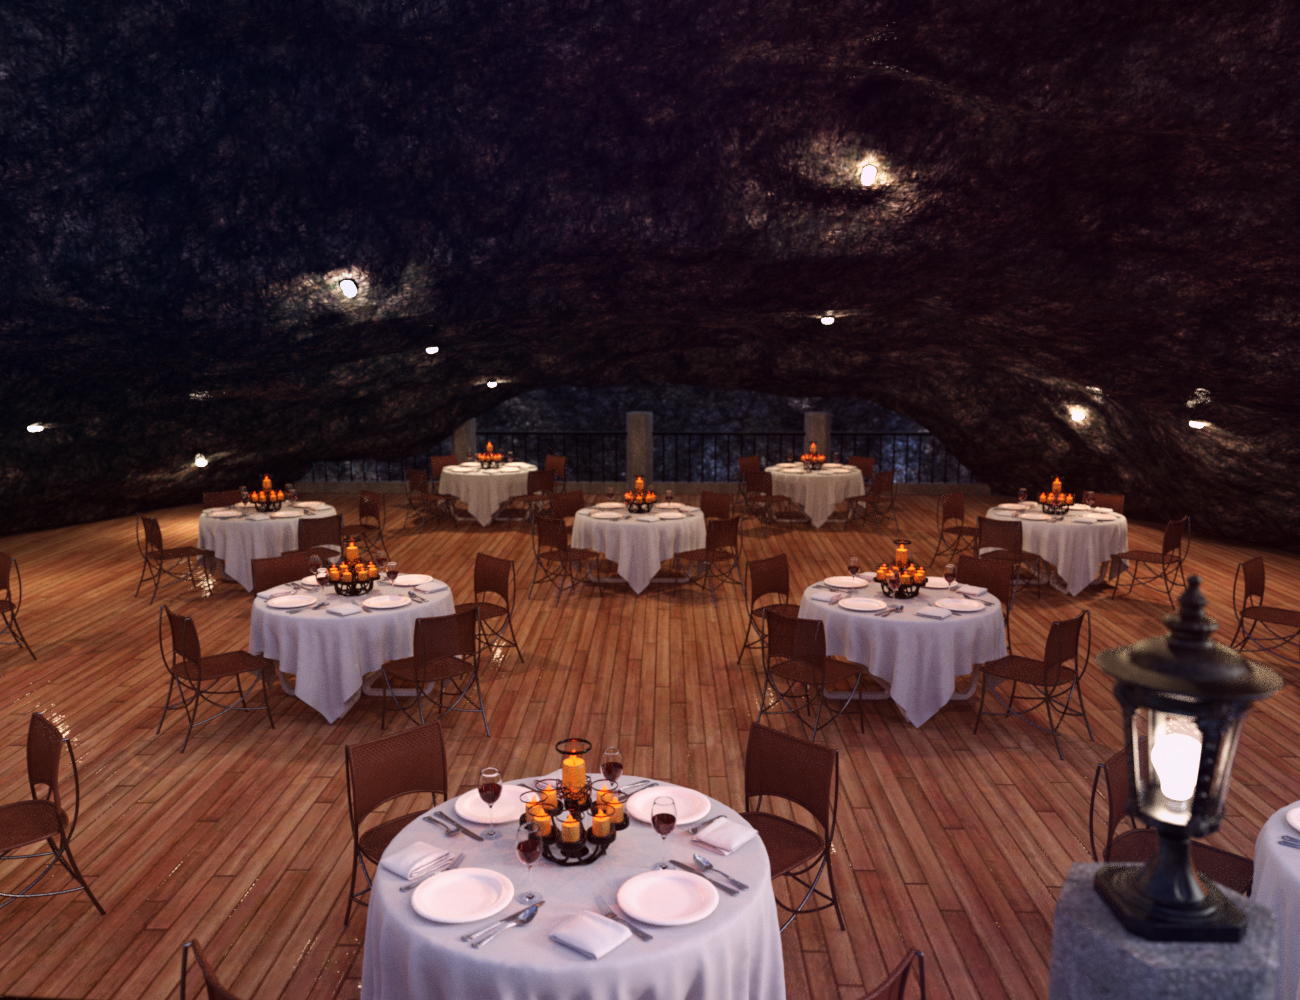 Cave Restaurant by: Charlie, 3D Models by Daz 3D